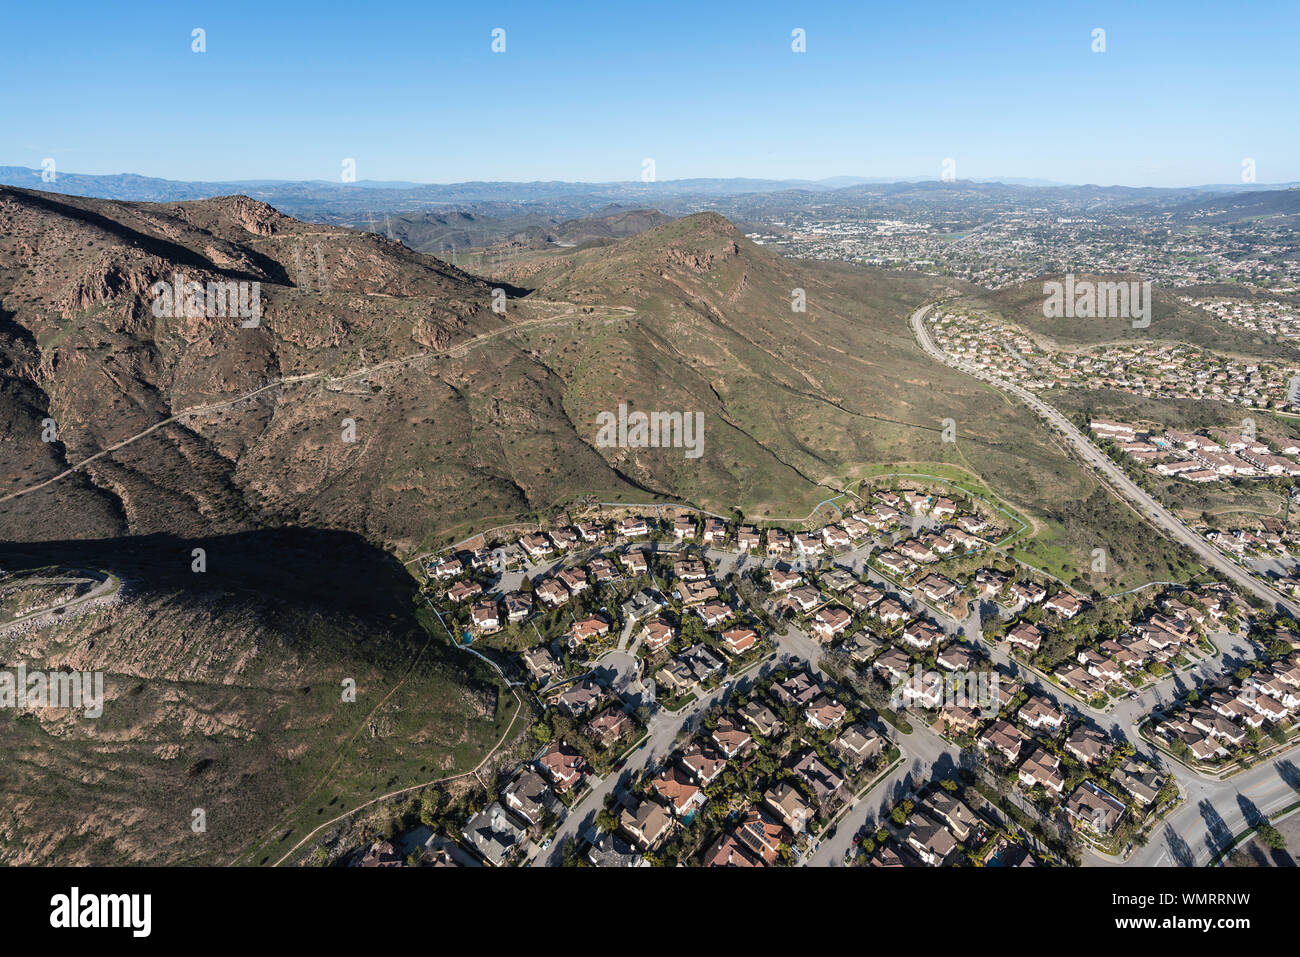 Aerial view of hills and homes in suburban Newbury Park near Los Angeles, California. Stock Photo